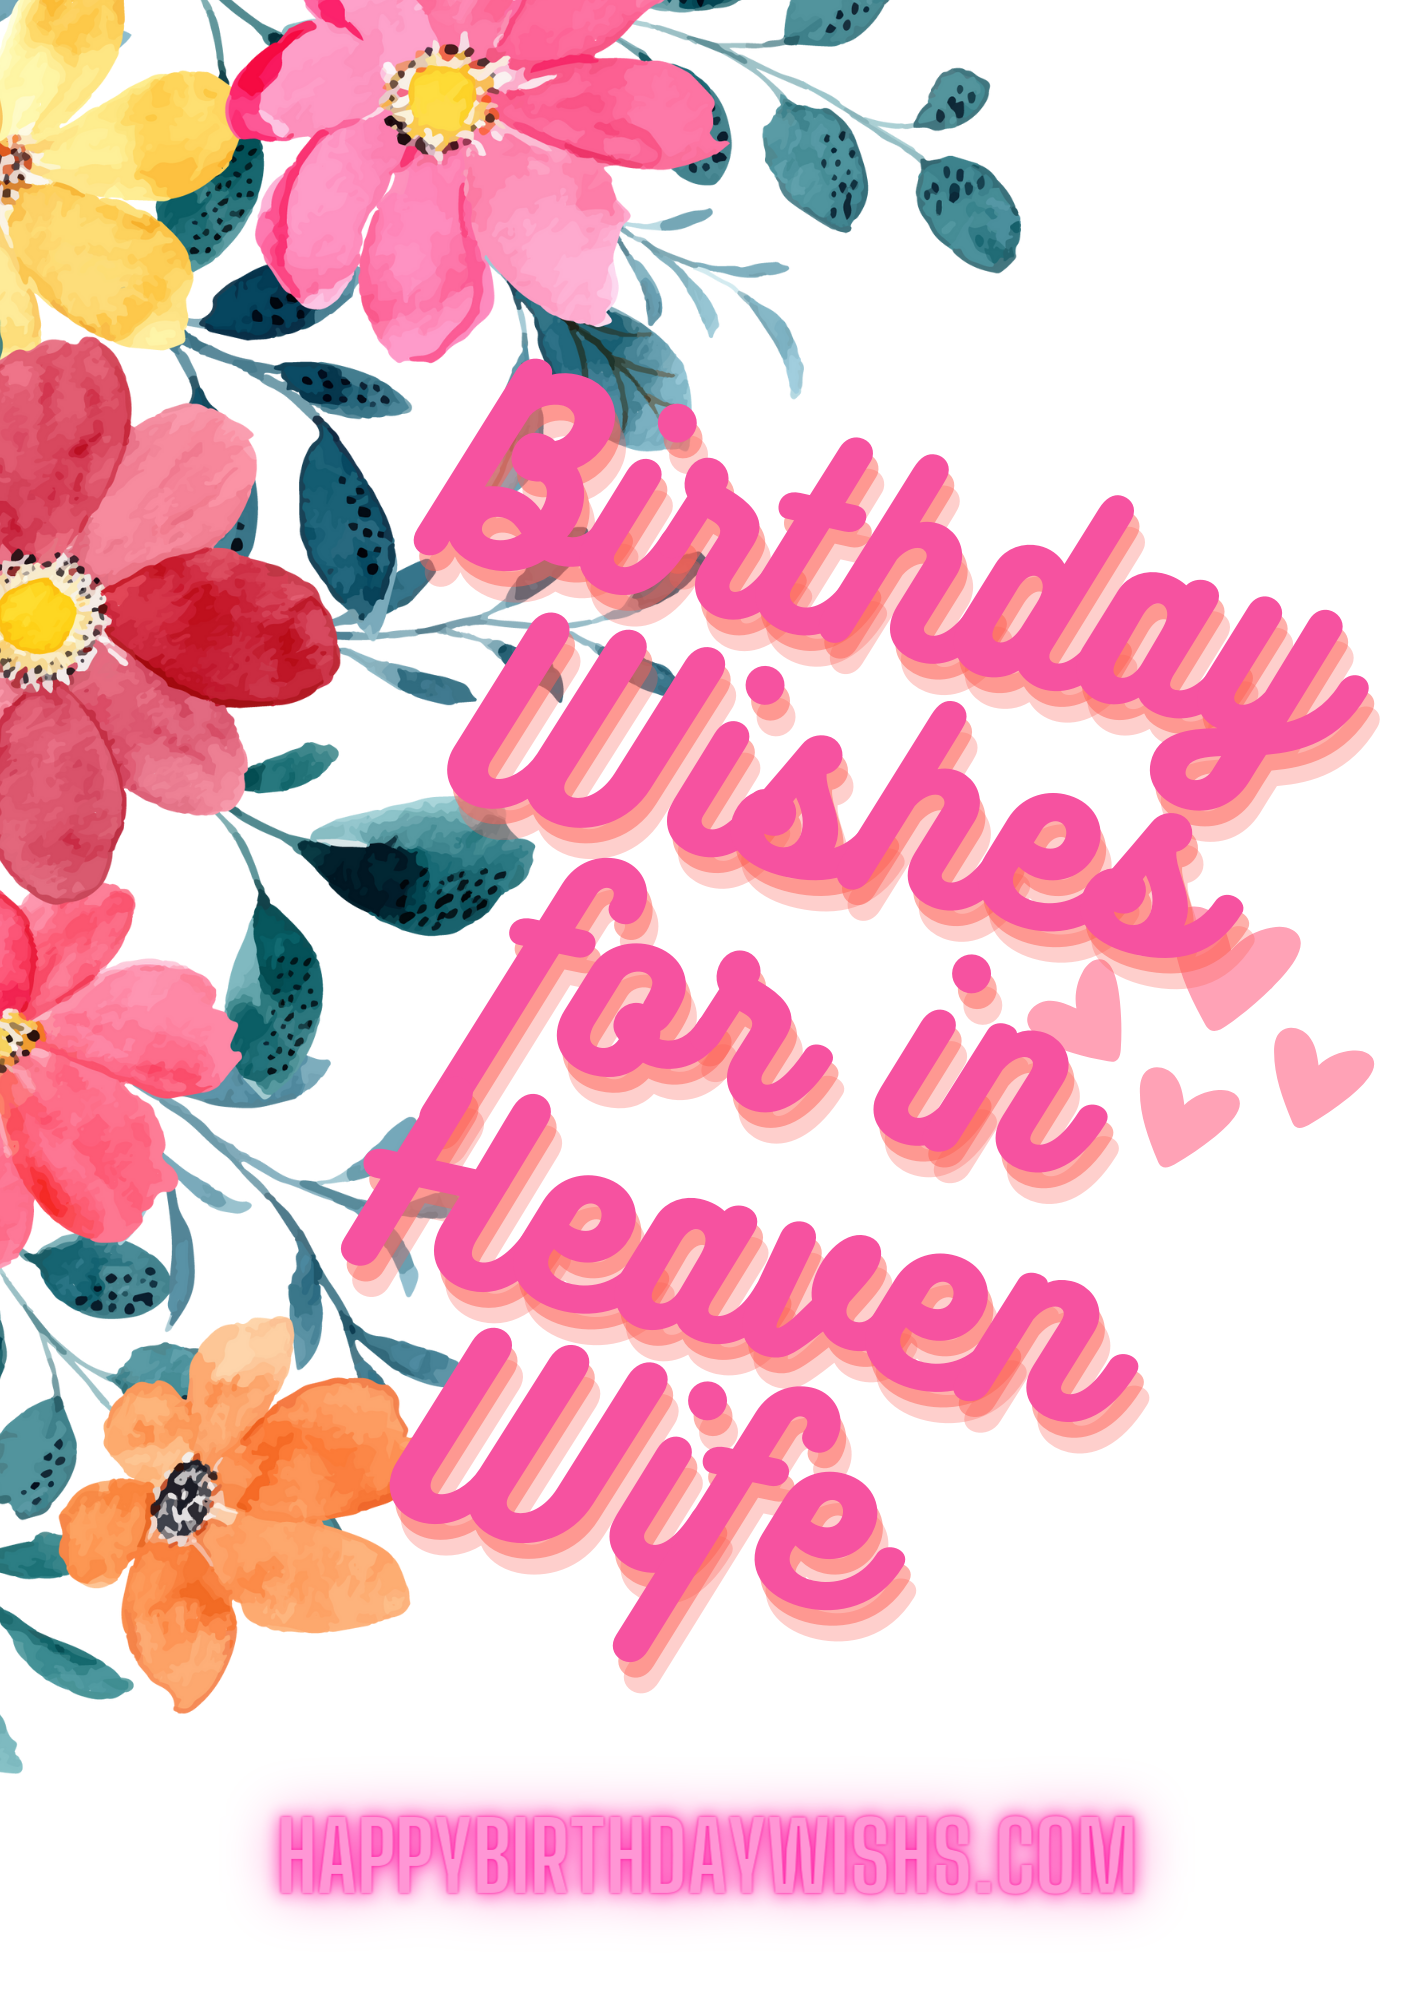 Birthday Wishes for in Heaven Wife 